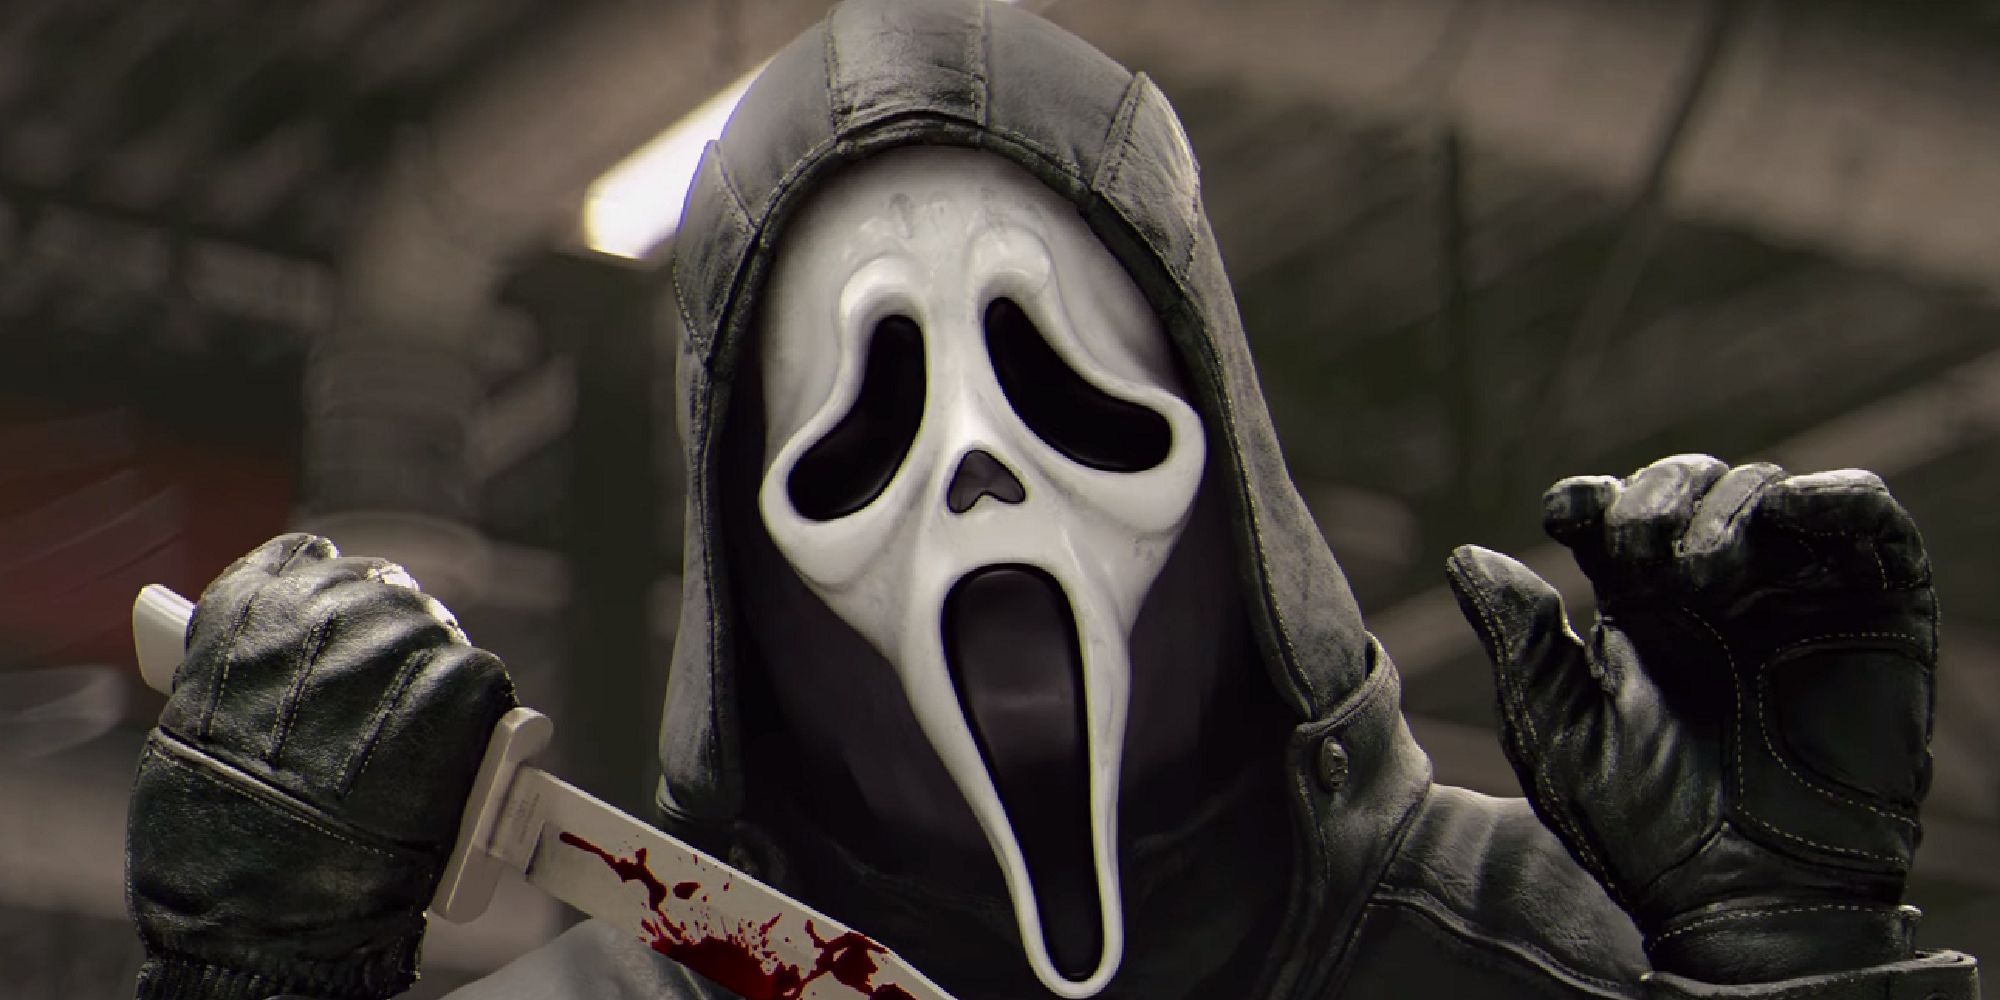 Ghostface from Dead by Daylight, holding a bloody knife in one hand as he waves with his other